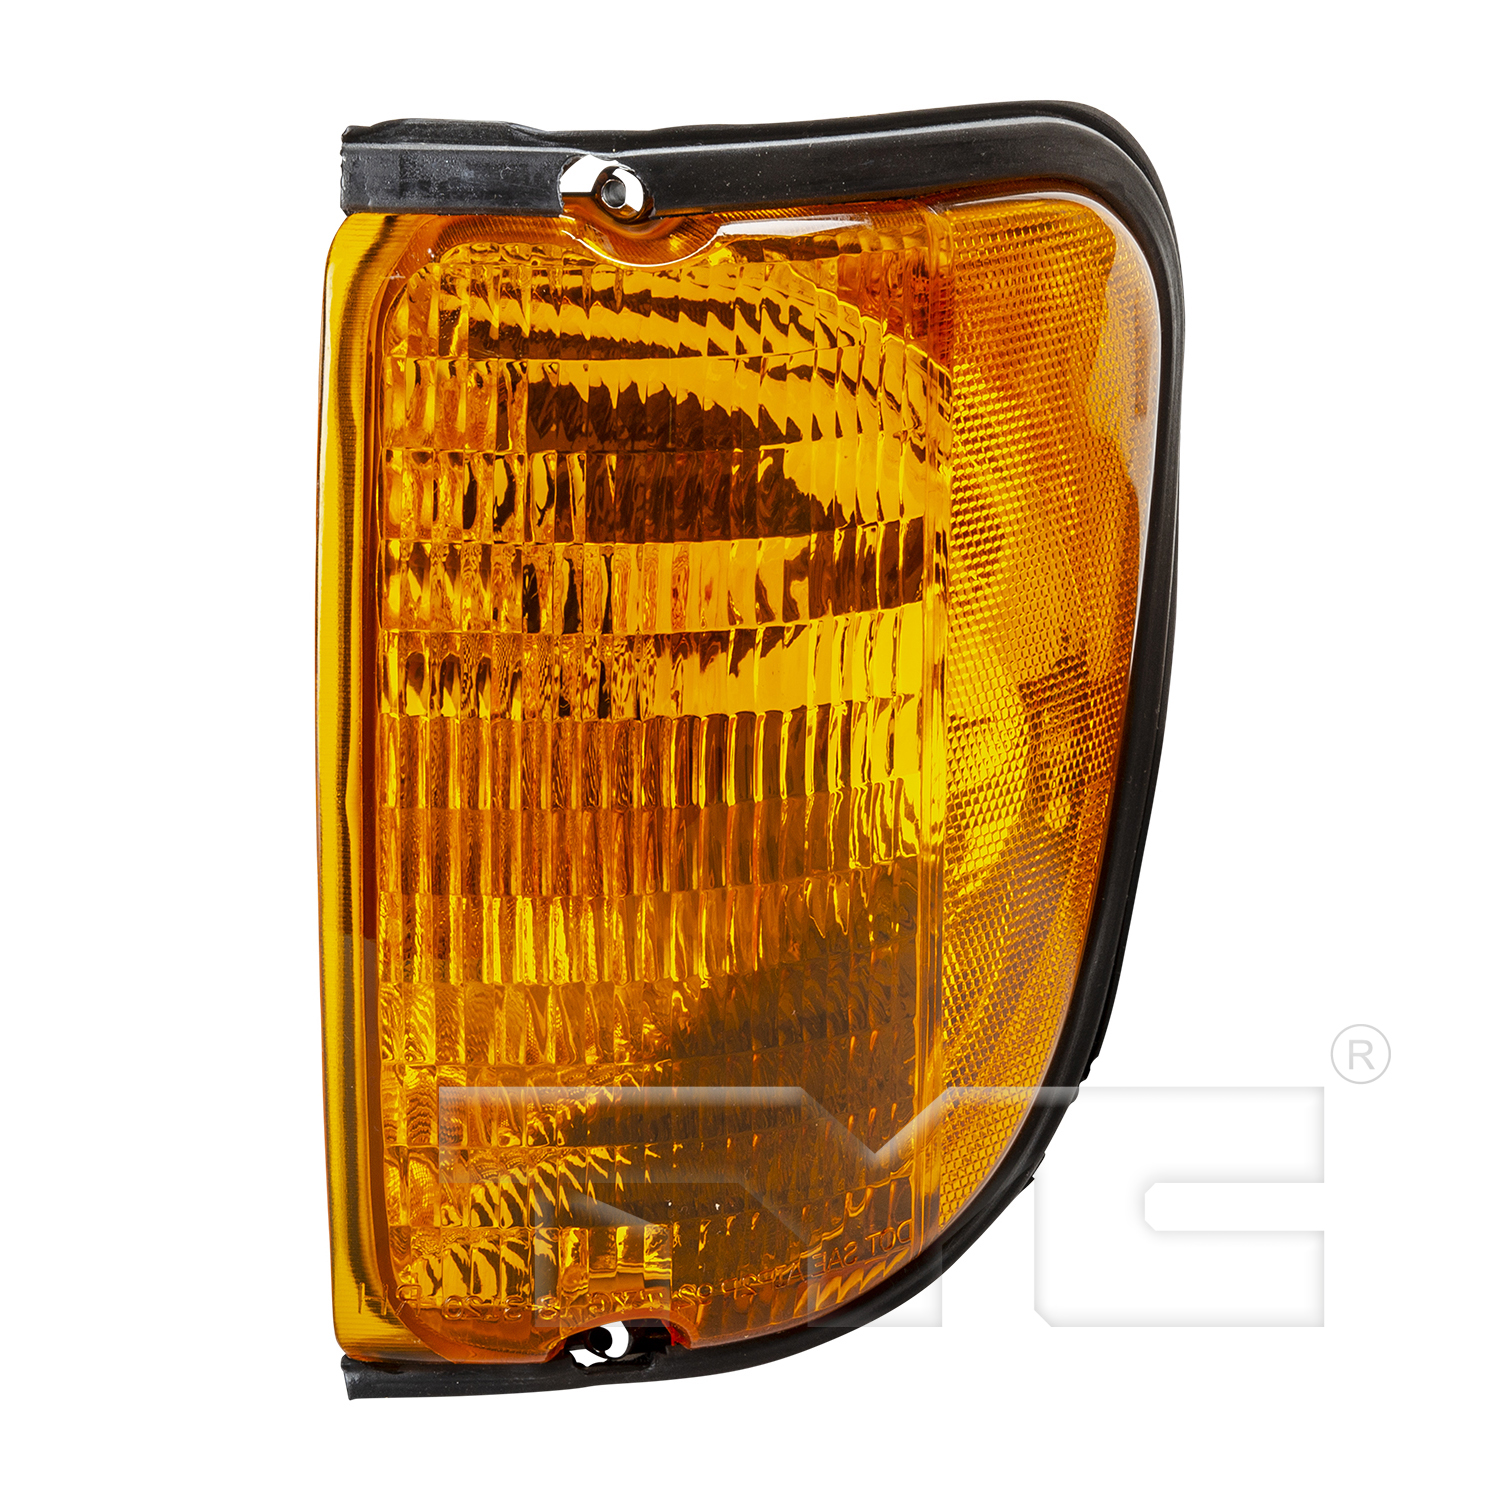 Aftermarket LAMPS for FORD - E-350 CLUB WAGON, E-350 CLUB WAGON,04-05,LT Parklamp assy